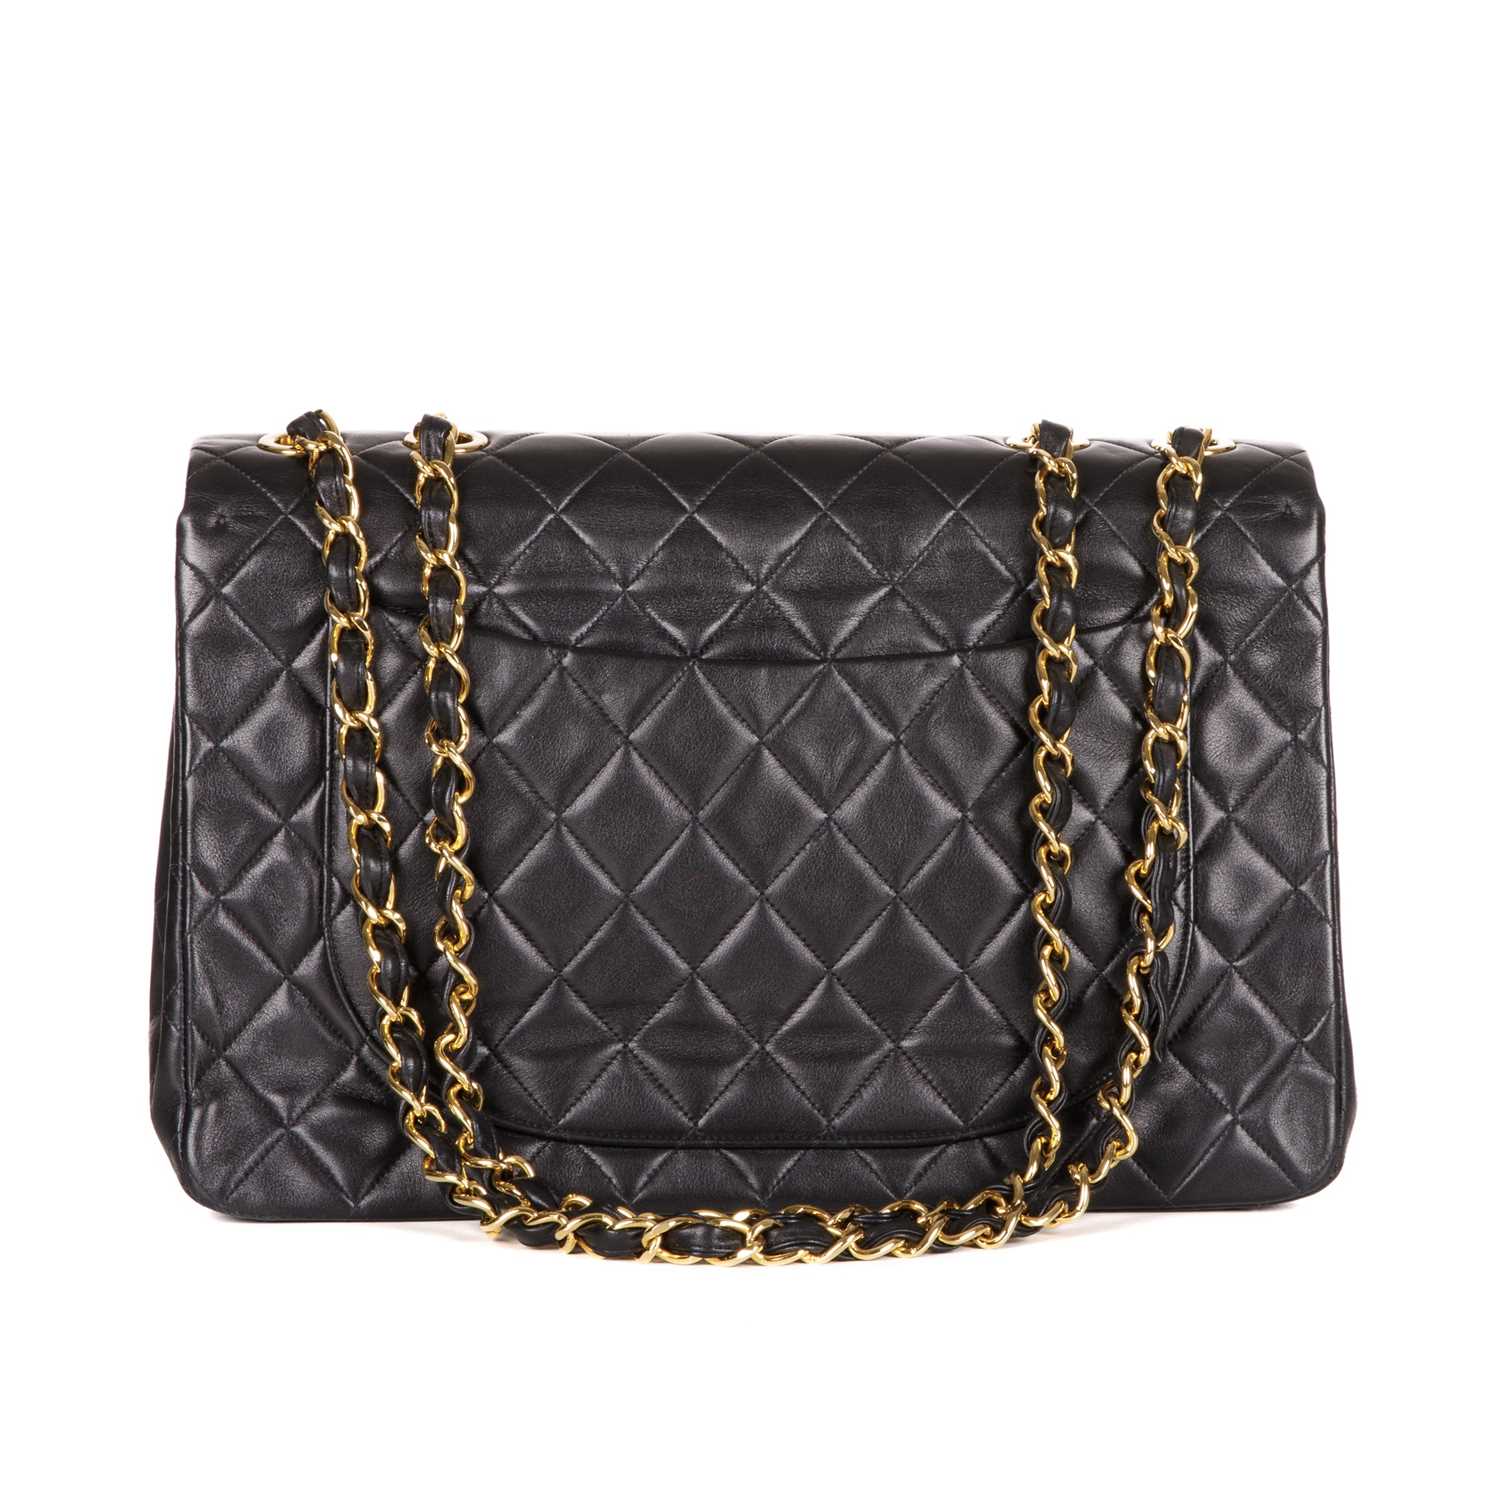 Chanel, a vintage Maxi Single Flap handbag, designed with a diamond quilted black leather - Image 2 of 4